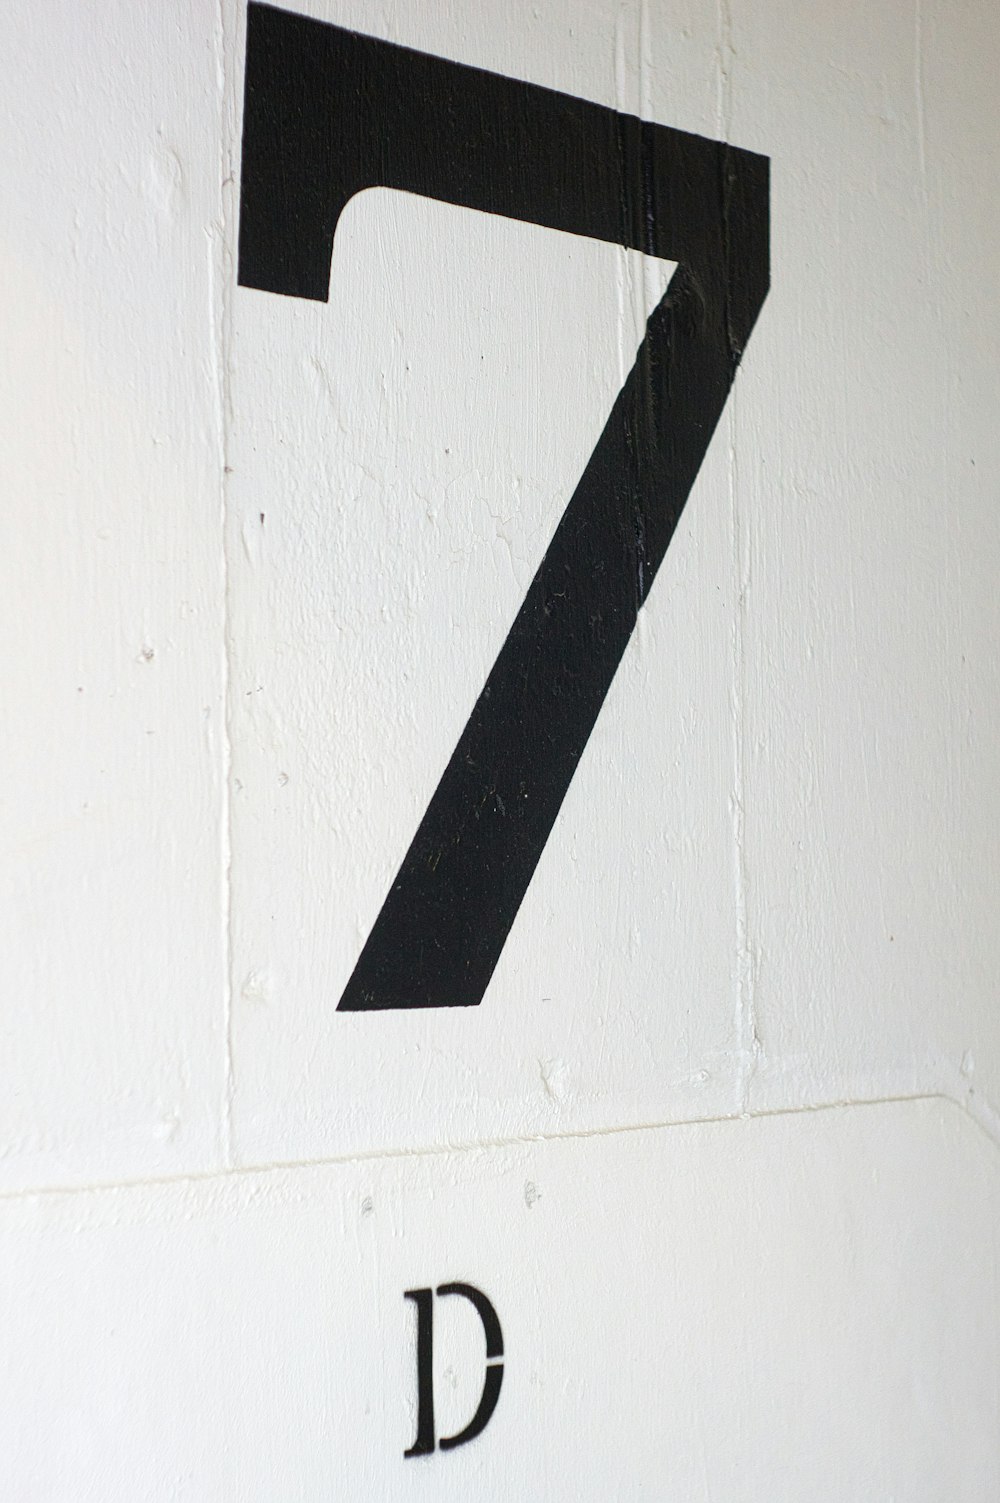 black arrow sign on white painted wall